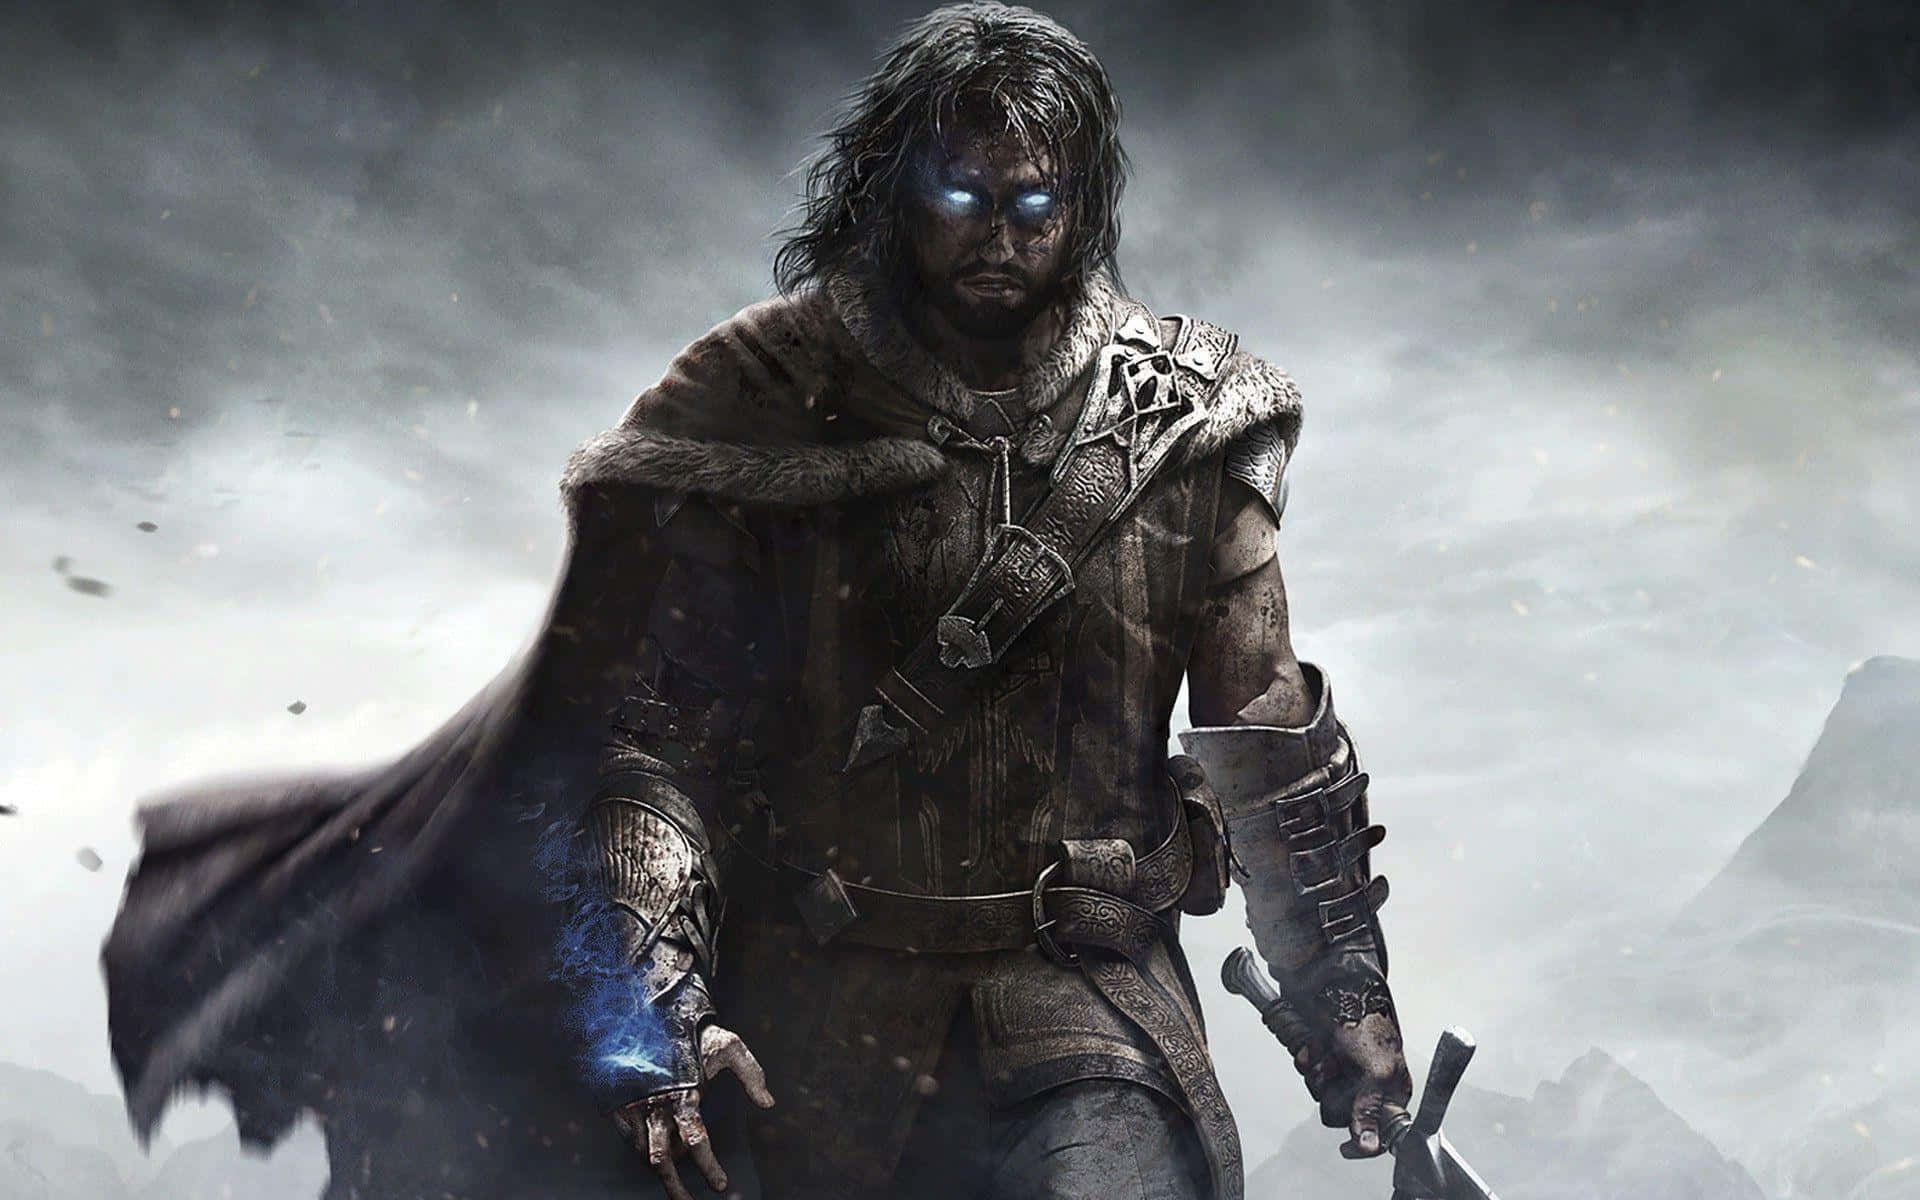 "Travel to Middle Earth and experience an epic adventure in Shadow of Mordor".